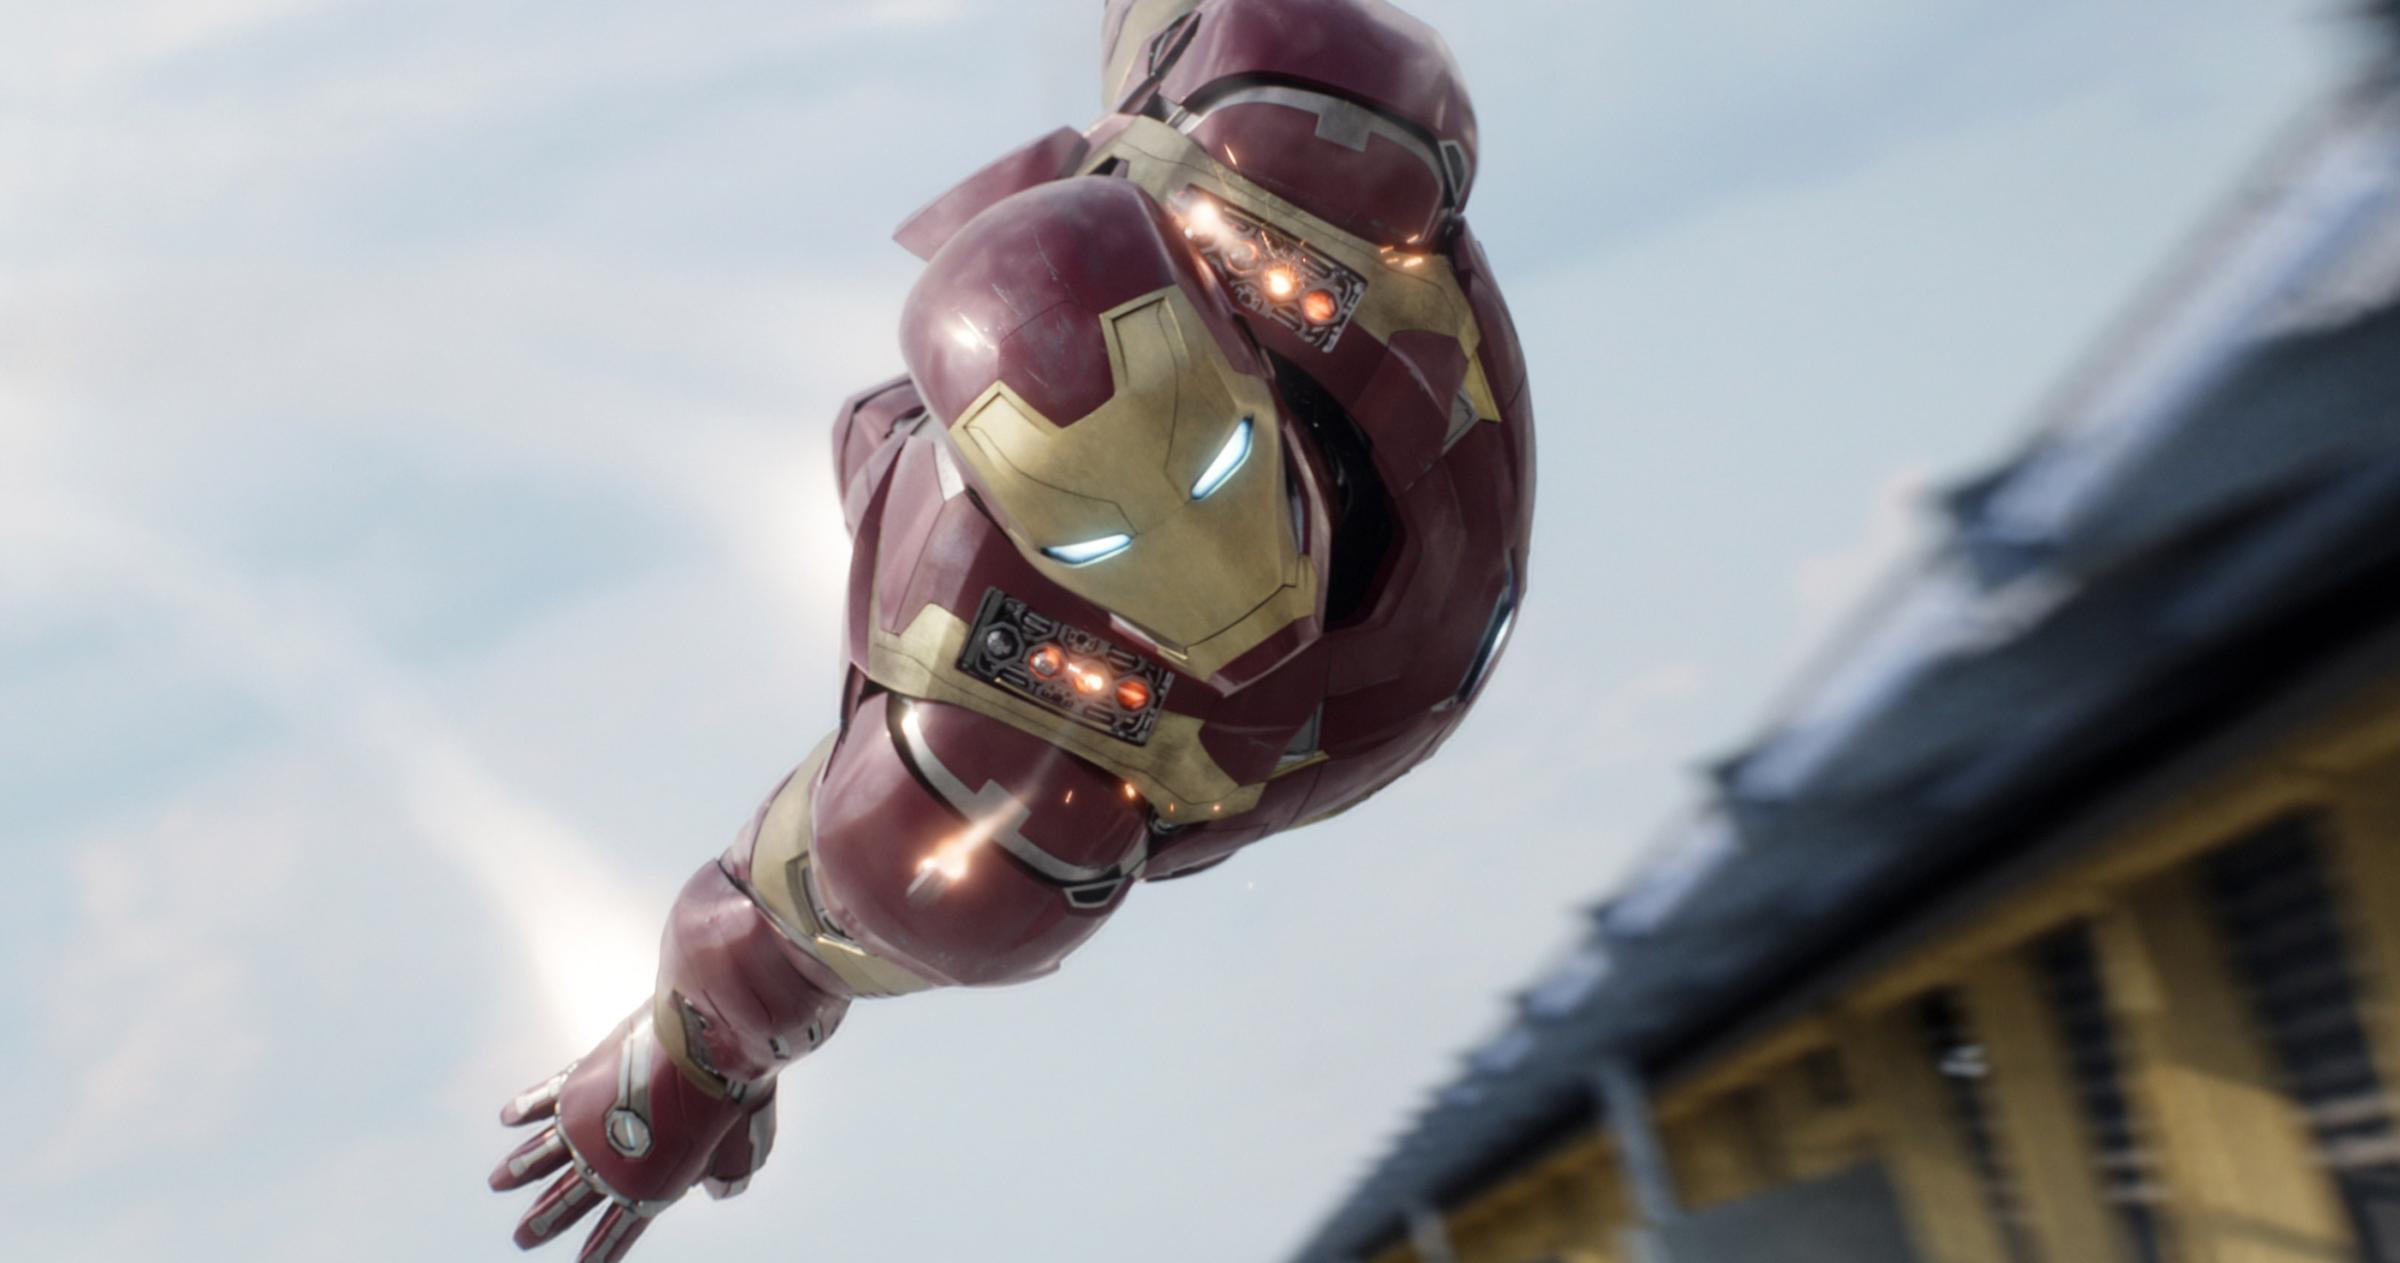 In this image released by Disney, Iron Man, portrayed by Robert Downey Jr., appears in a scene from "Captain America: Civil War." (Disney-Marvel via AP)